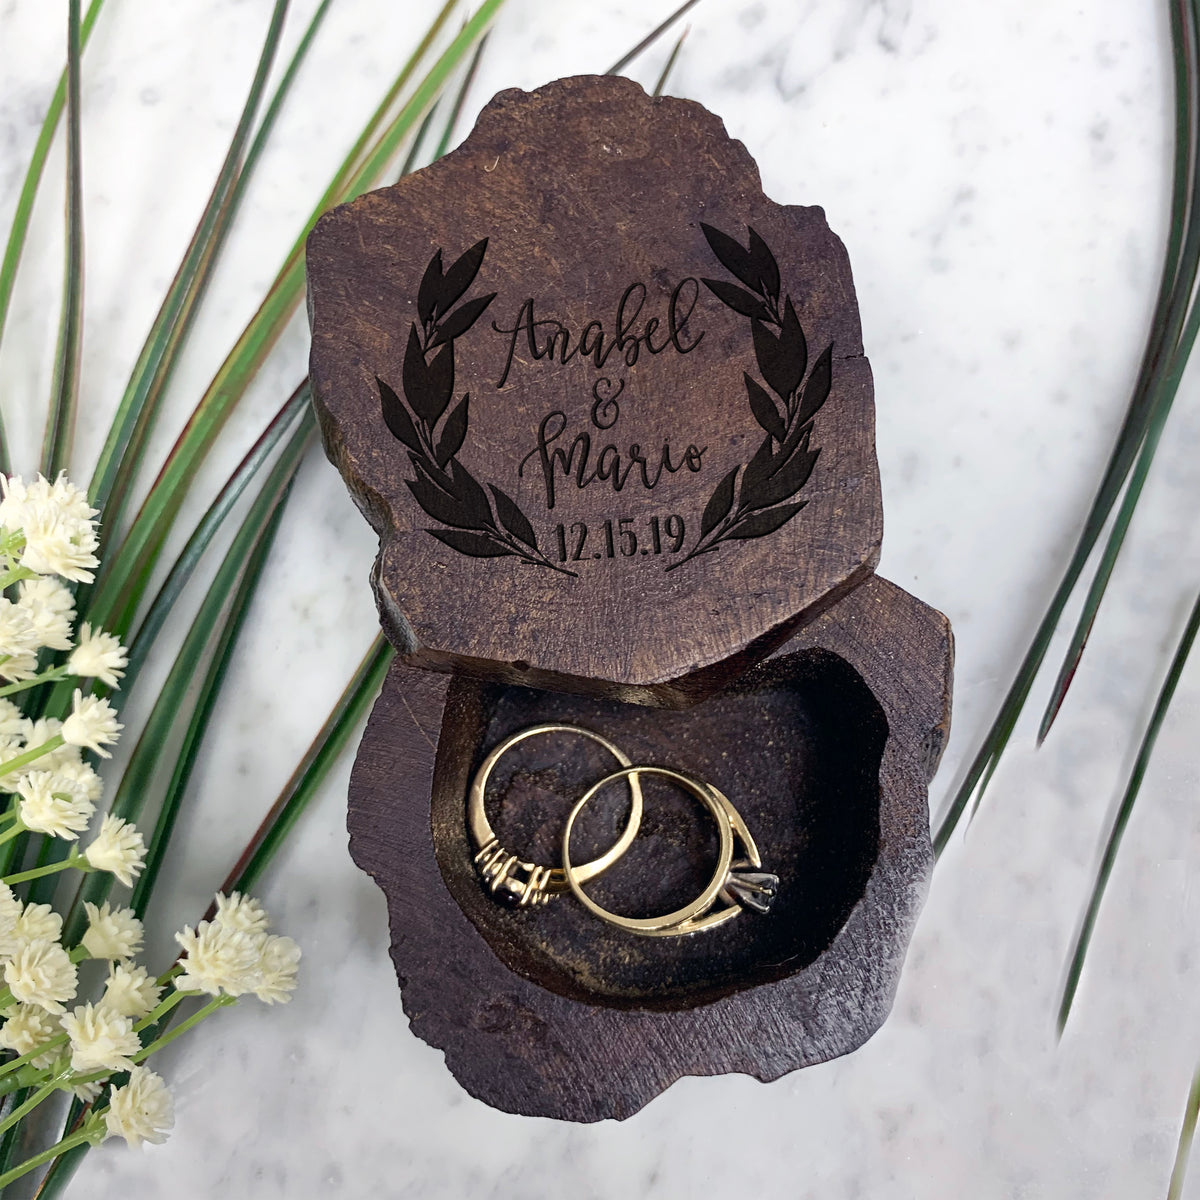 Jewelry Box Rings Rustic, Personalized Ring Box Wooden